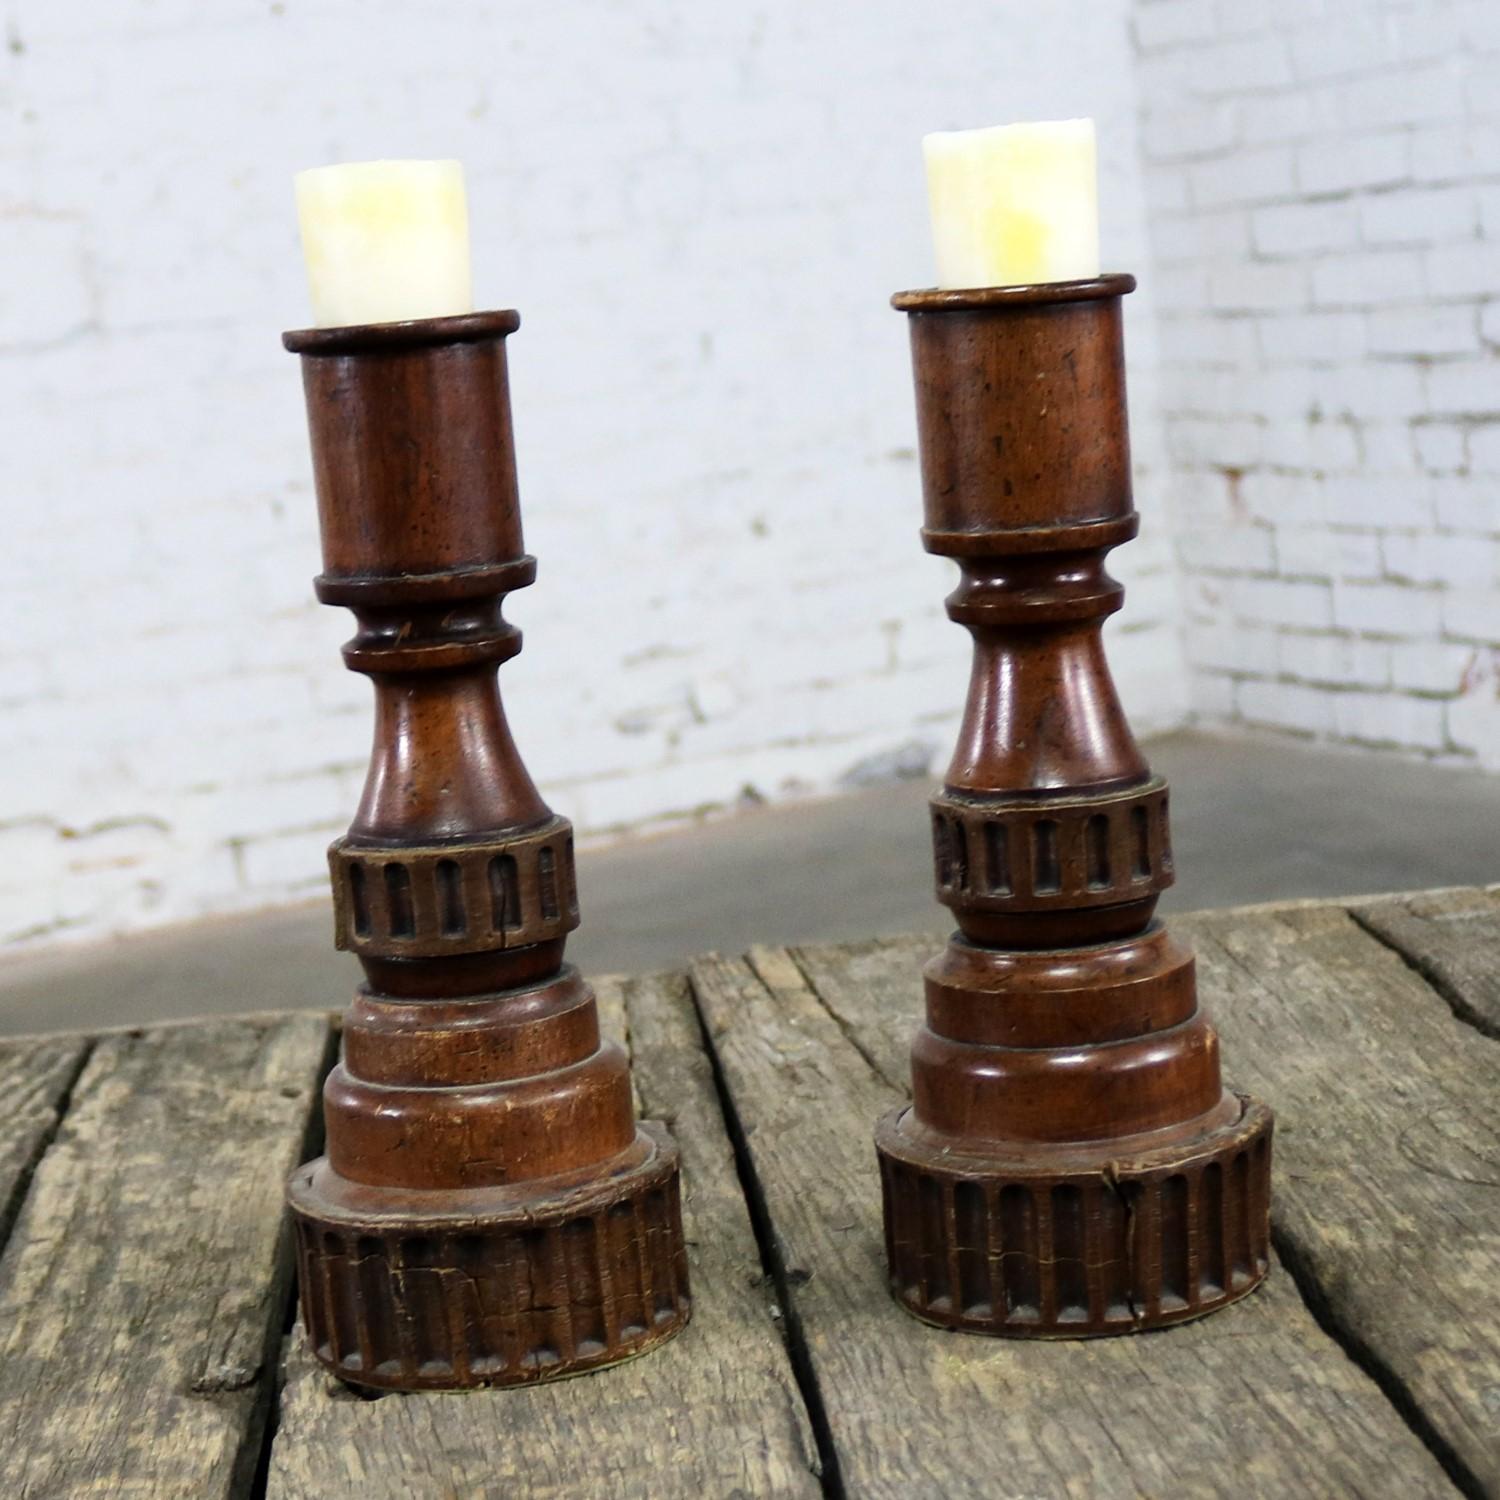 Handsome pair of distressed turned wood and composite candleholders. These are in good vintage condition with lots of nice patina, circa 20th century.

Sometimes you just need a simple pair of candlesticks whether you use them alone or combine